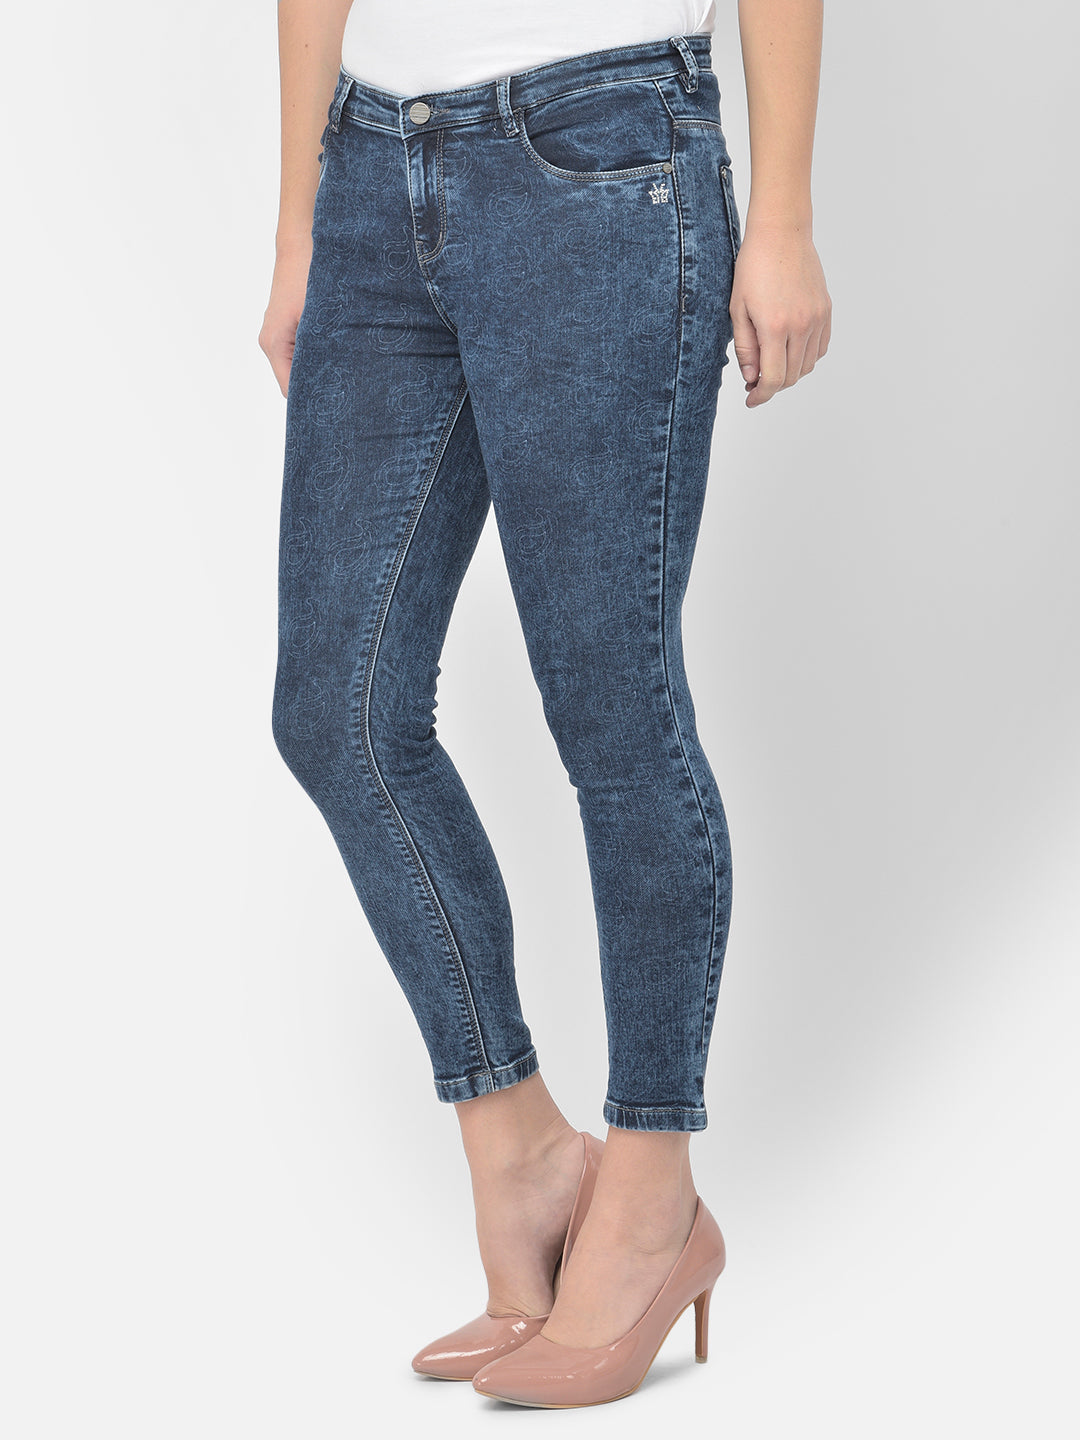 Blue Printed Jeans - Women Jeans